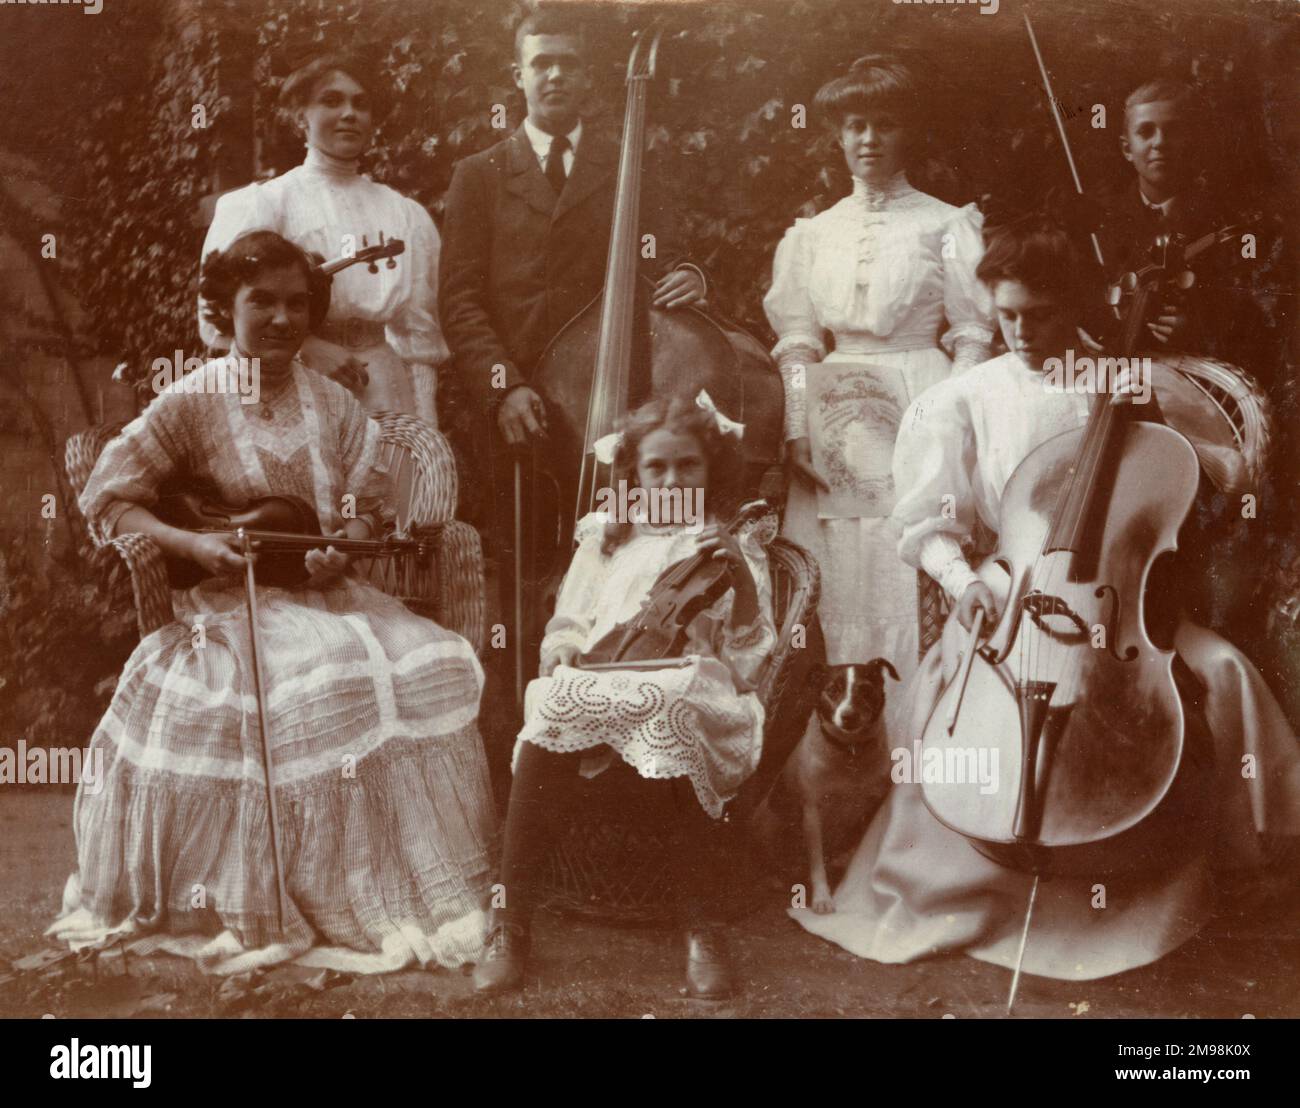 Members of the Dalrymple Orchestra, photographed in a garden. Stock Photo